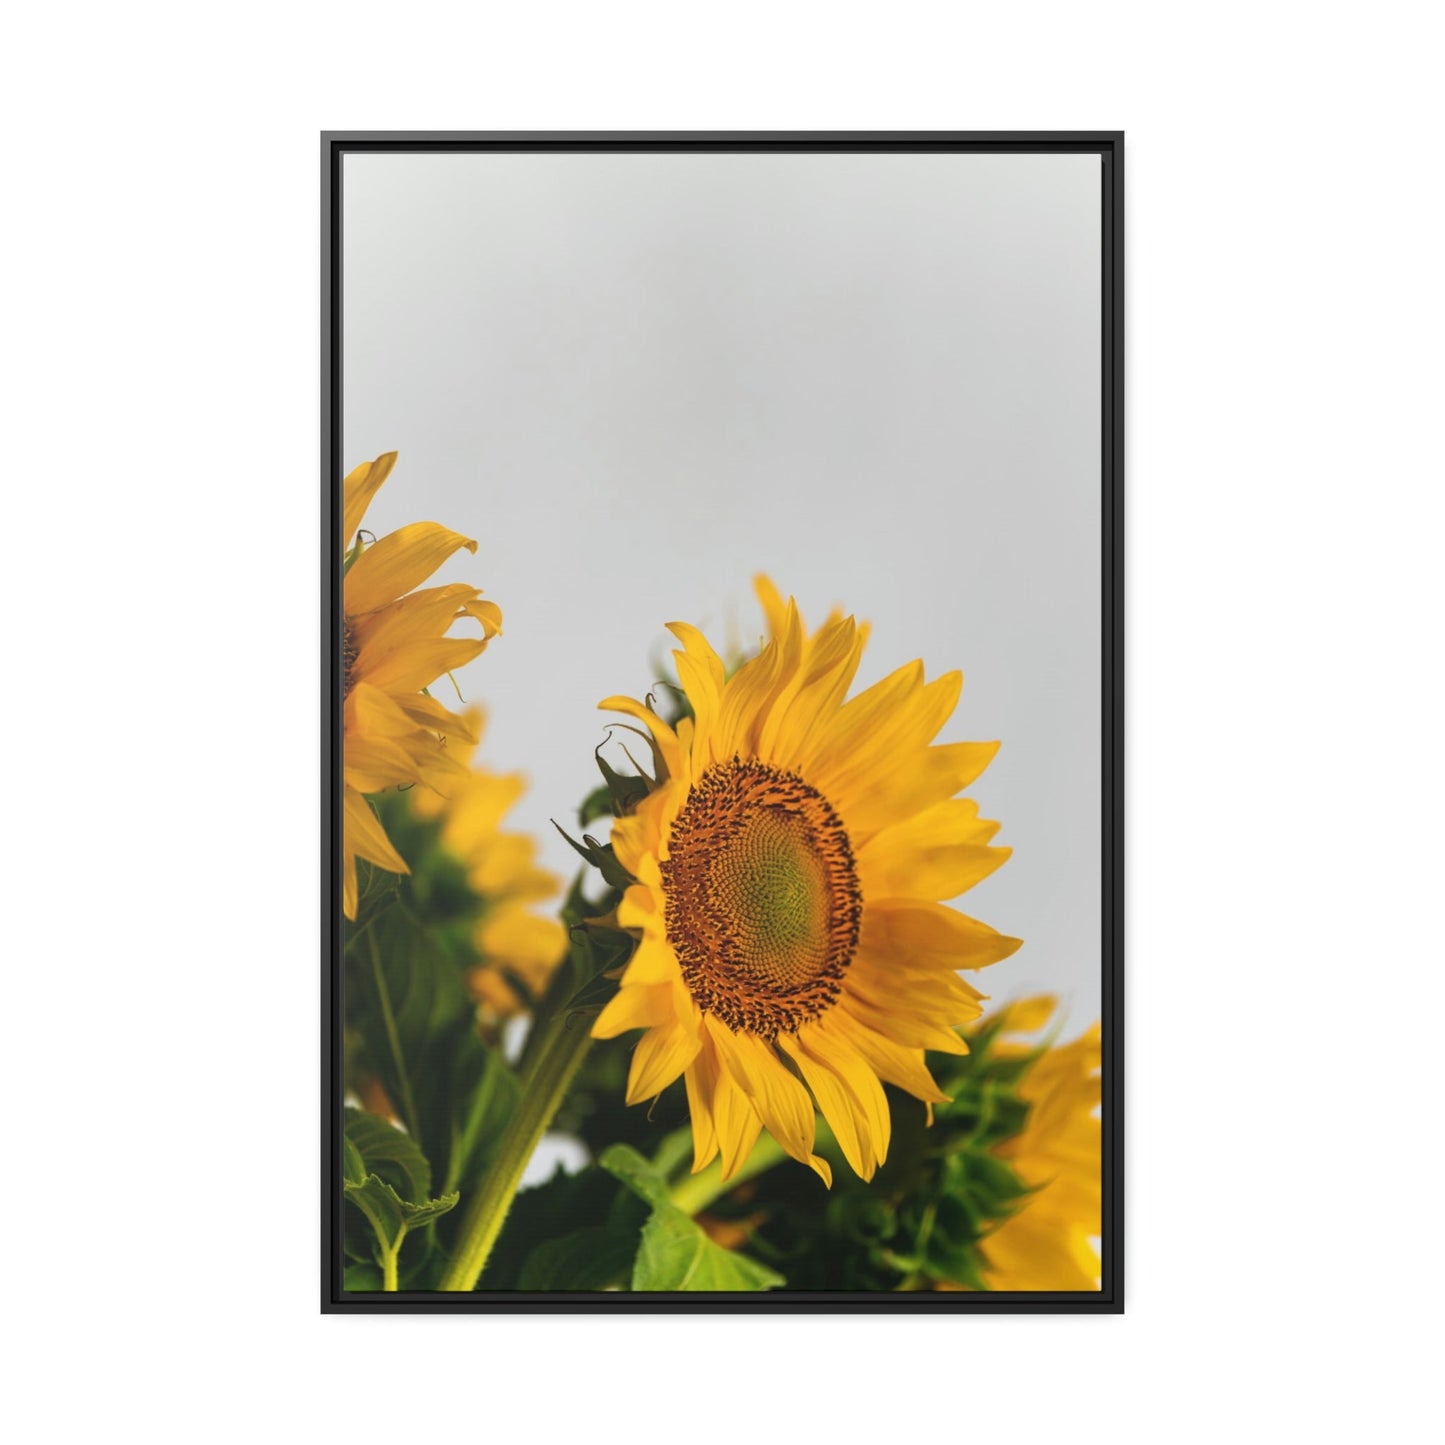 Sunny Delight: A Blissful and Cheerful Glimpse into the Beauty of Sunflowers